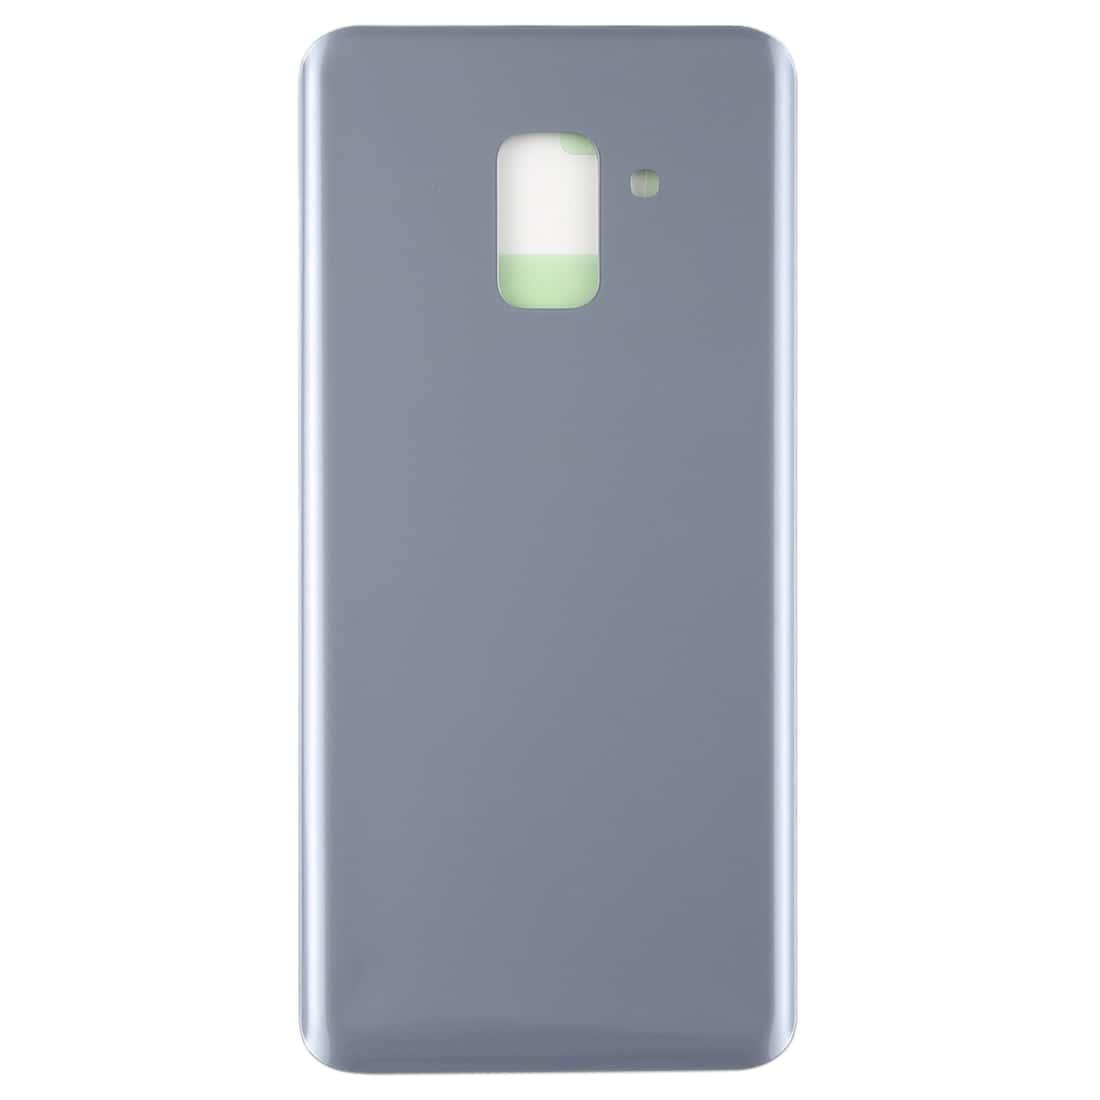 Back Glass Panel for  Samsung Galaxy A8 2018 A530 Grey